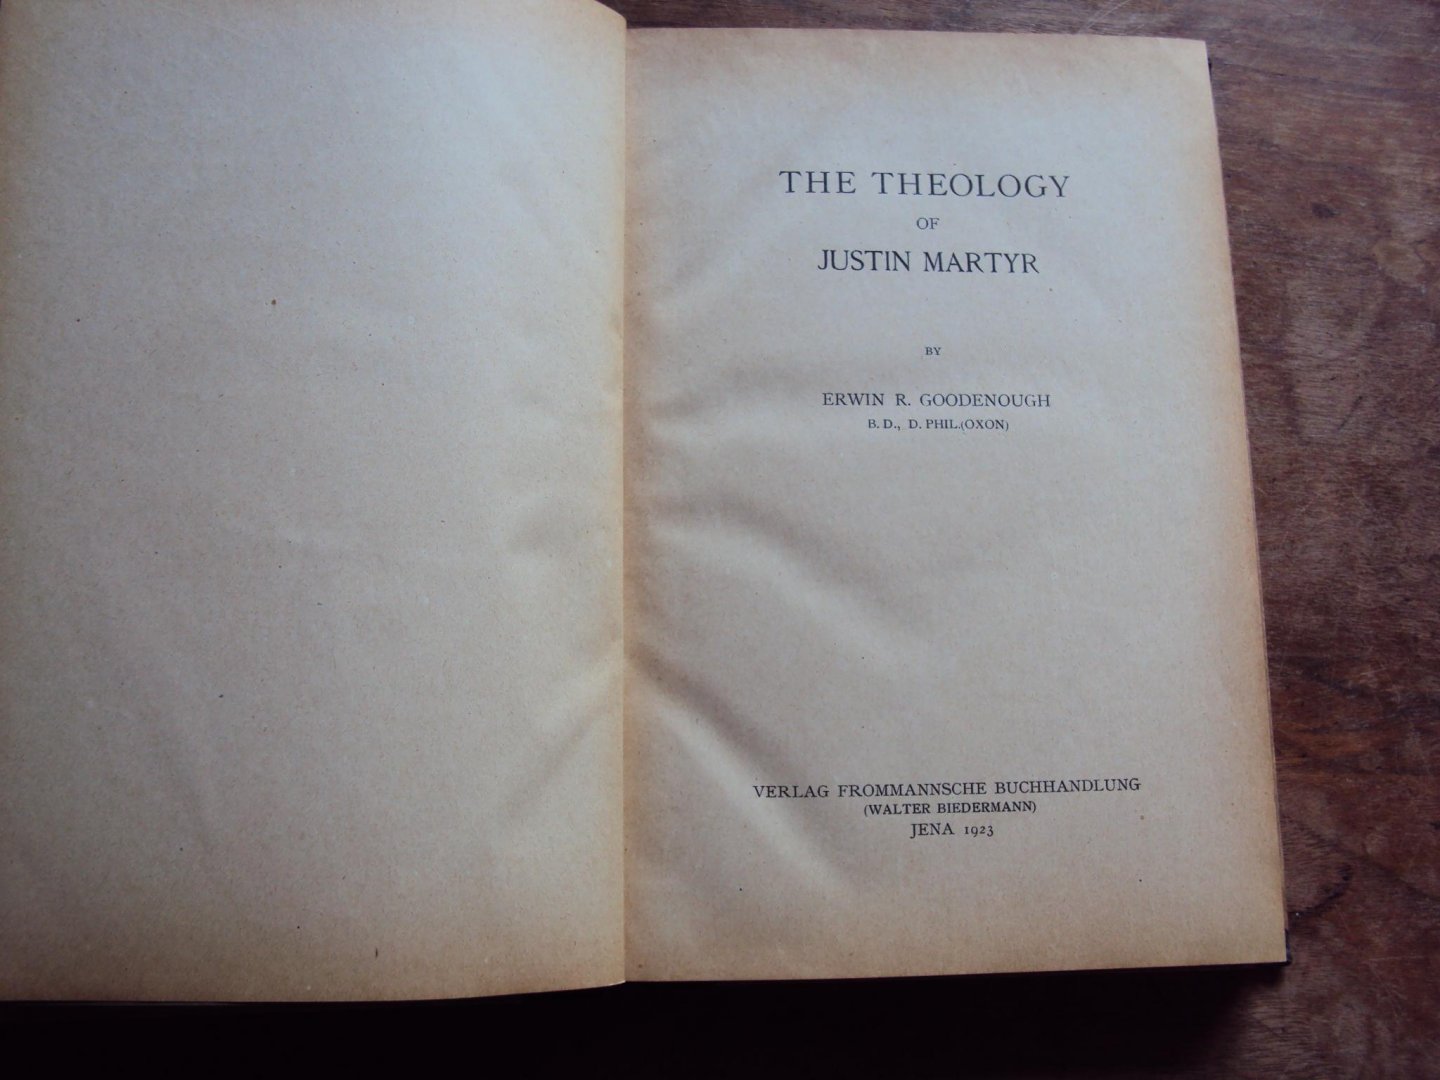 Goodenough, Erwin R. - The Theology of Justin Martyr